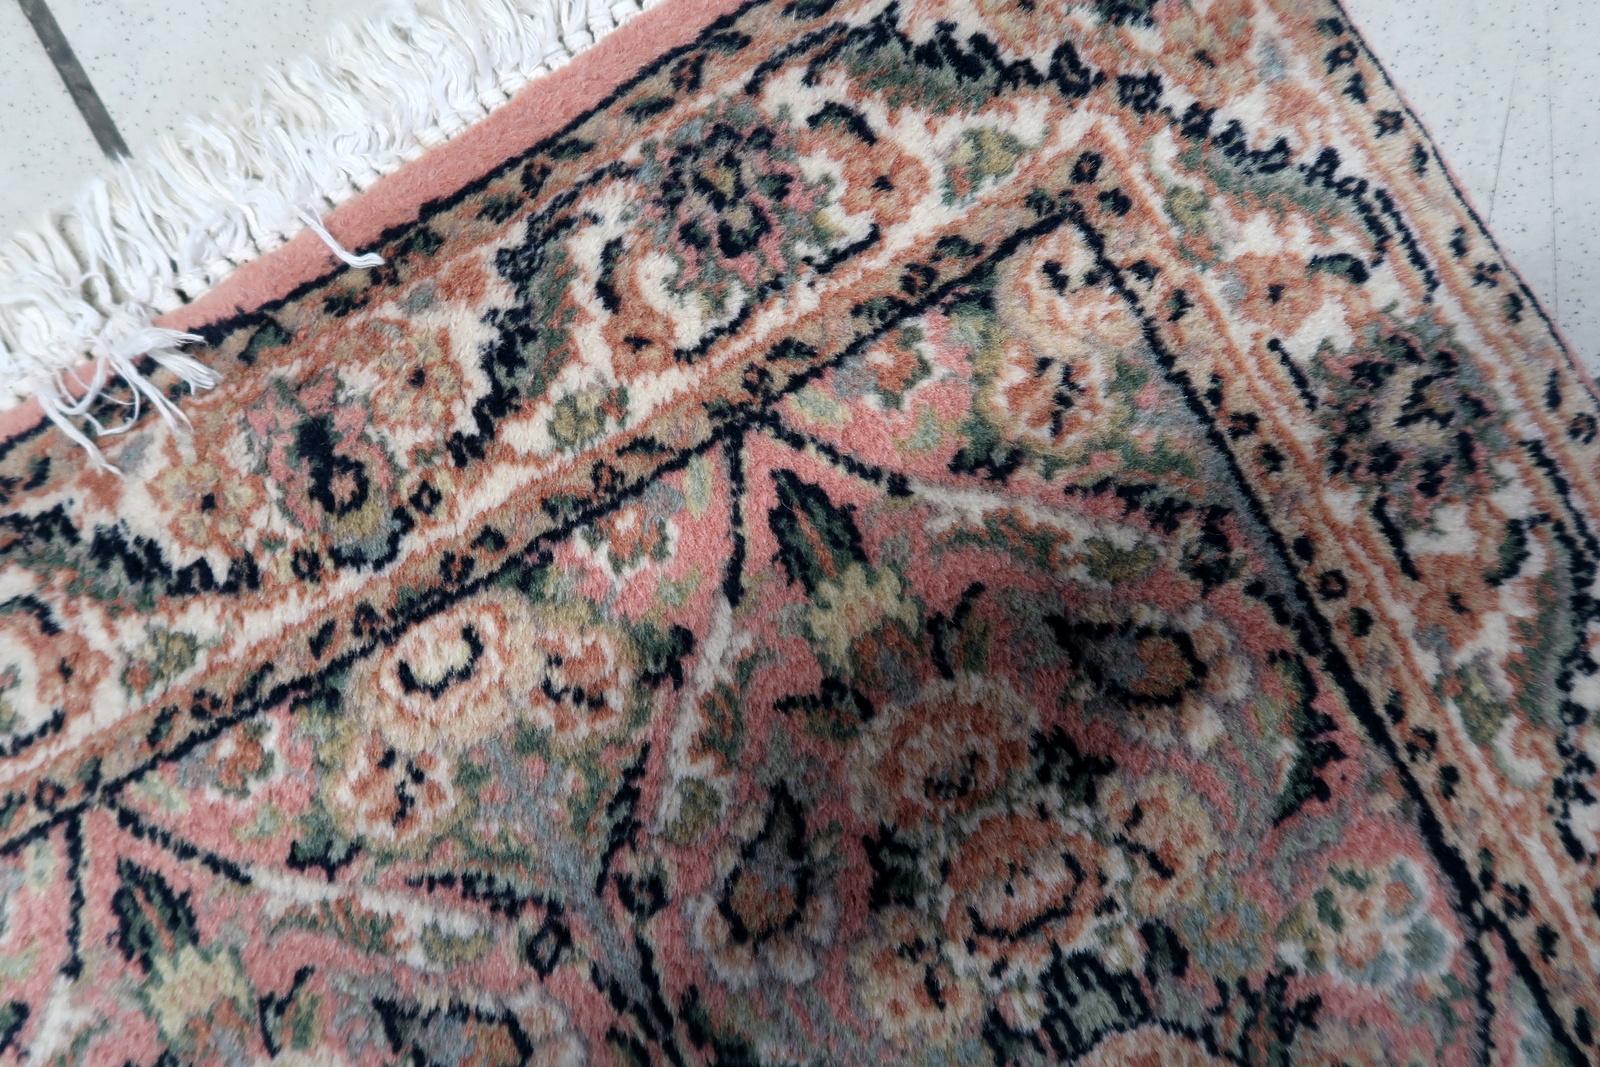 Introducing our exquisite Handmade Vintage Persian Kerman Rug from the 1950s. This charming rug features a compact size of 2 feet by 3.1 feet (61cm x 97cm), making it a perfect accent piece for any space.

Crafted with utmost care, this rug is in